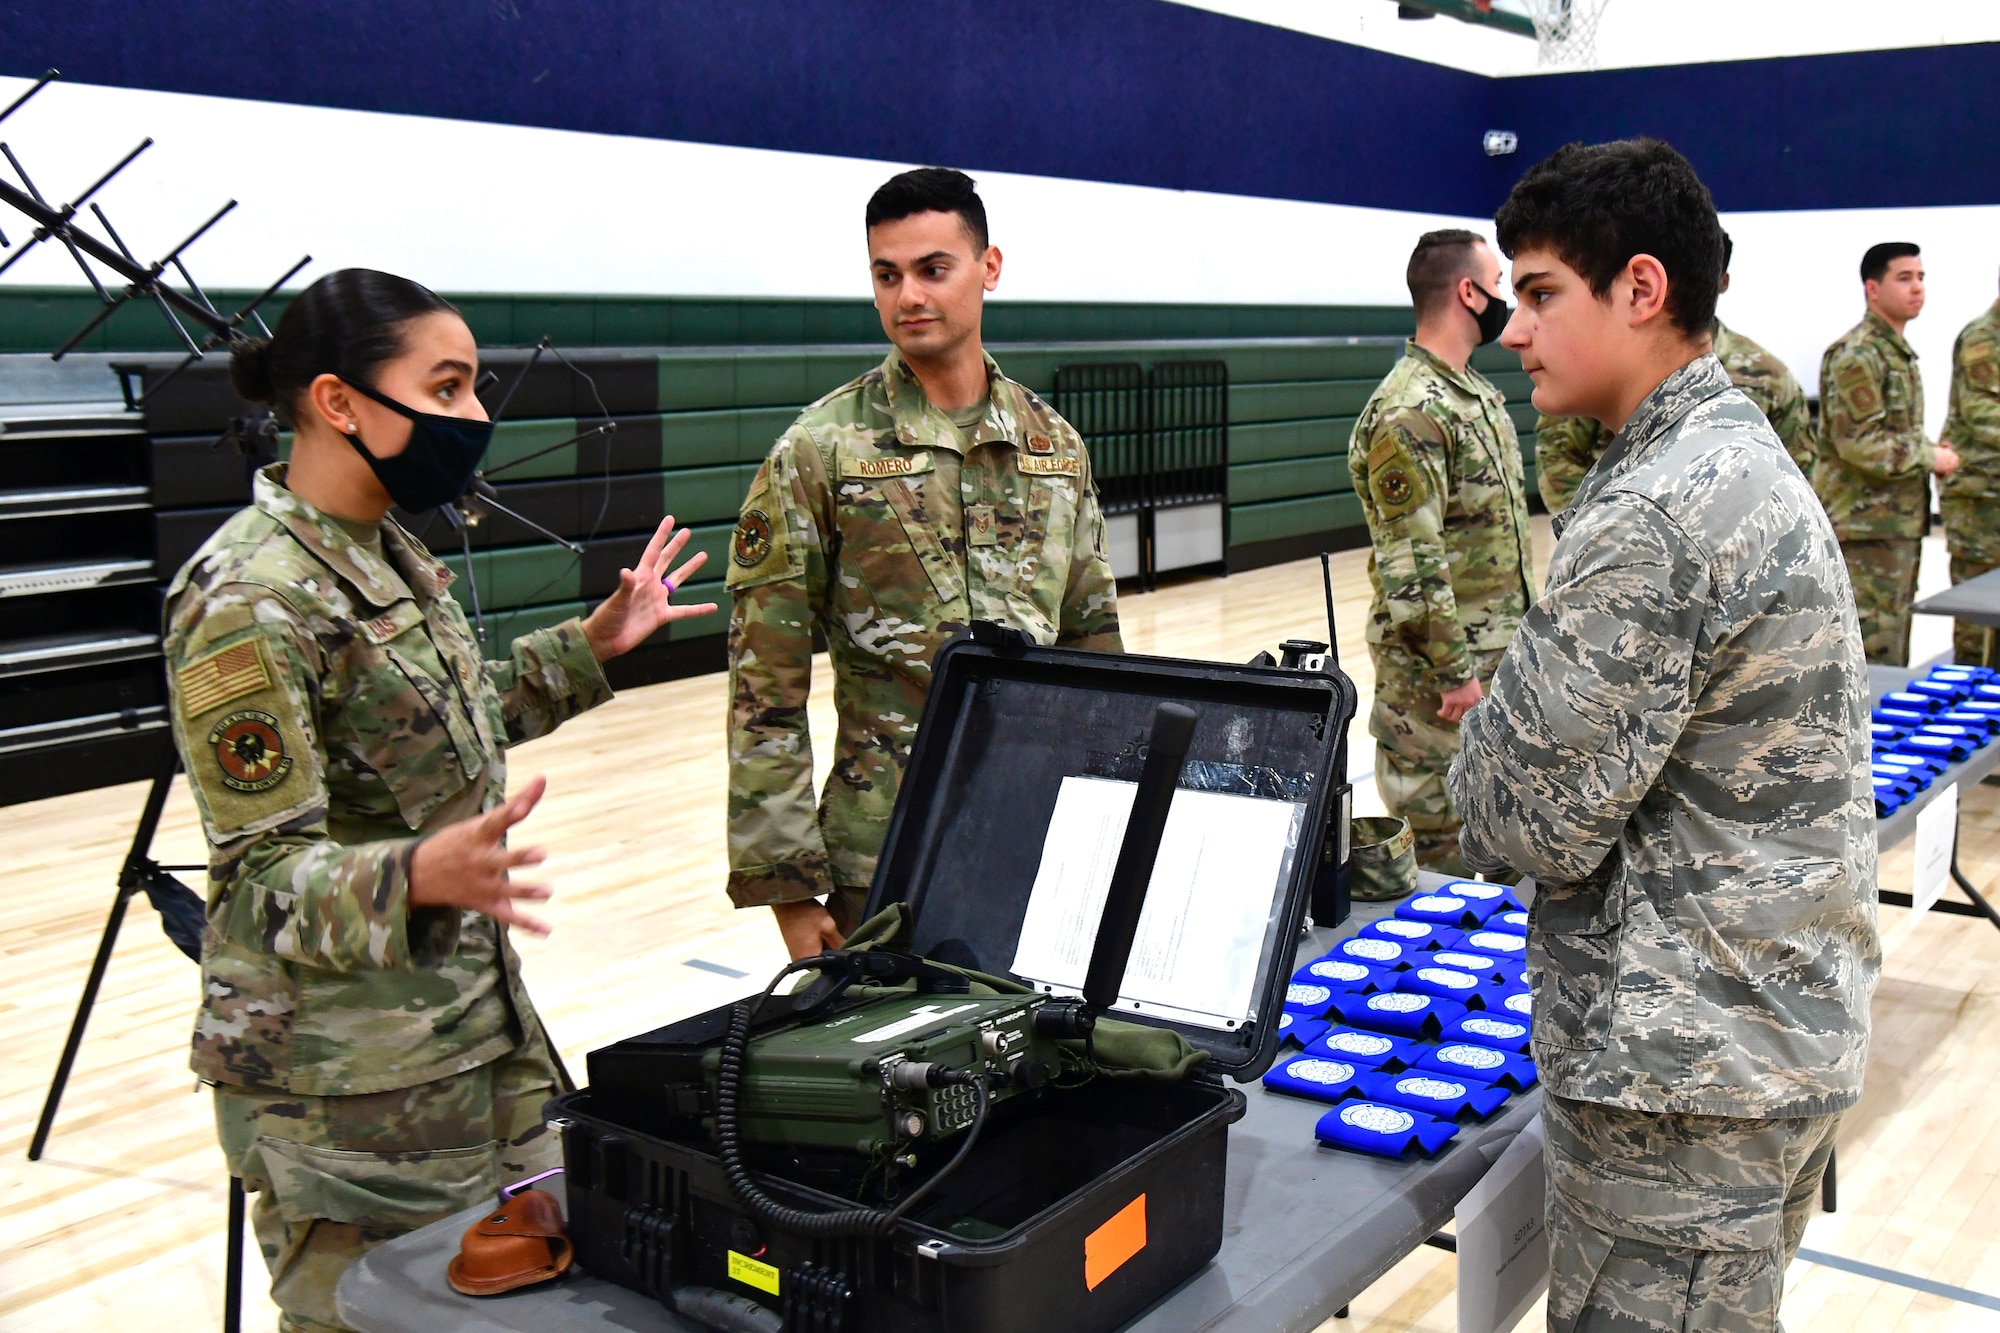 Senior Airman Laura Rojas, 729th Air Control Squadron, speaks with a student while participating in a job fair at the Utah Military Academy, May 25, 2021, in Riverdale, Utah. Airmen from Hill Air Force Base recently hosted the event at the nearby charter high school to educate and inspire students, as well as promote interest in the possibility of future military careers. (U.S. Air Force photo by Todd Cromar)